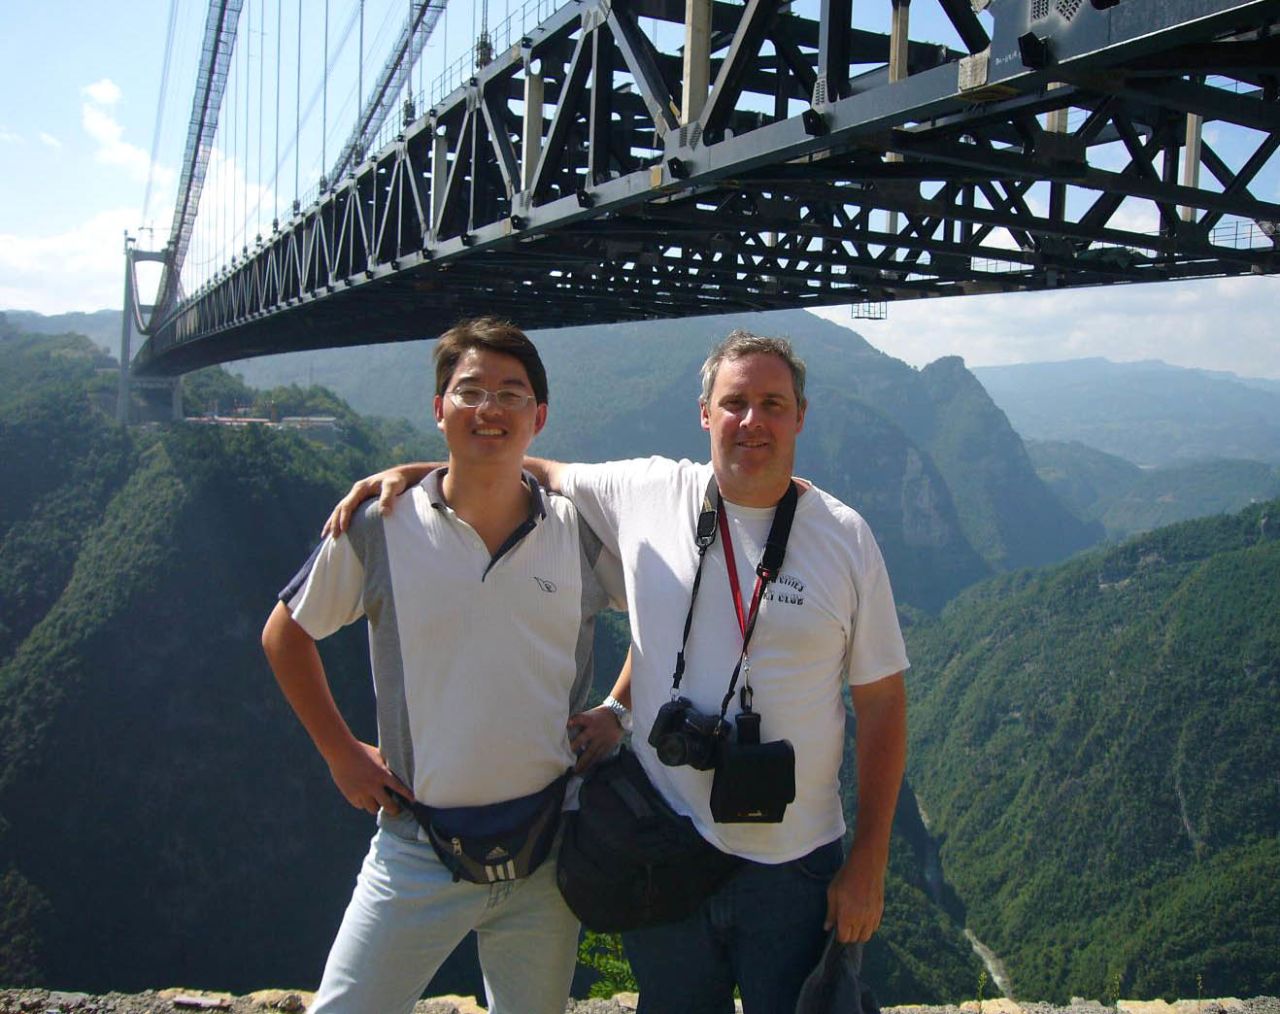 Eric Sakowski, right, a Los Angeles-based film and video producer, began his bridge obsession as a boy by reading the "Guinness Book of World Records." He started tracking lofty bridges on his own, eventually recording his research on<a href="http://highestbridges.com" target="_blank" target="_blank"> his website highestbridges.com</a>. Recently Sakowski has been touring China, along with Chinese bridge engineer Shijie Du.